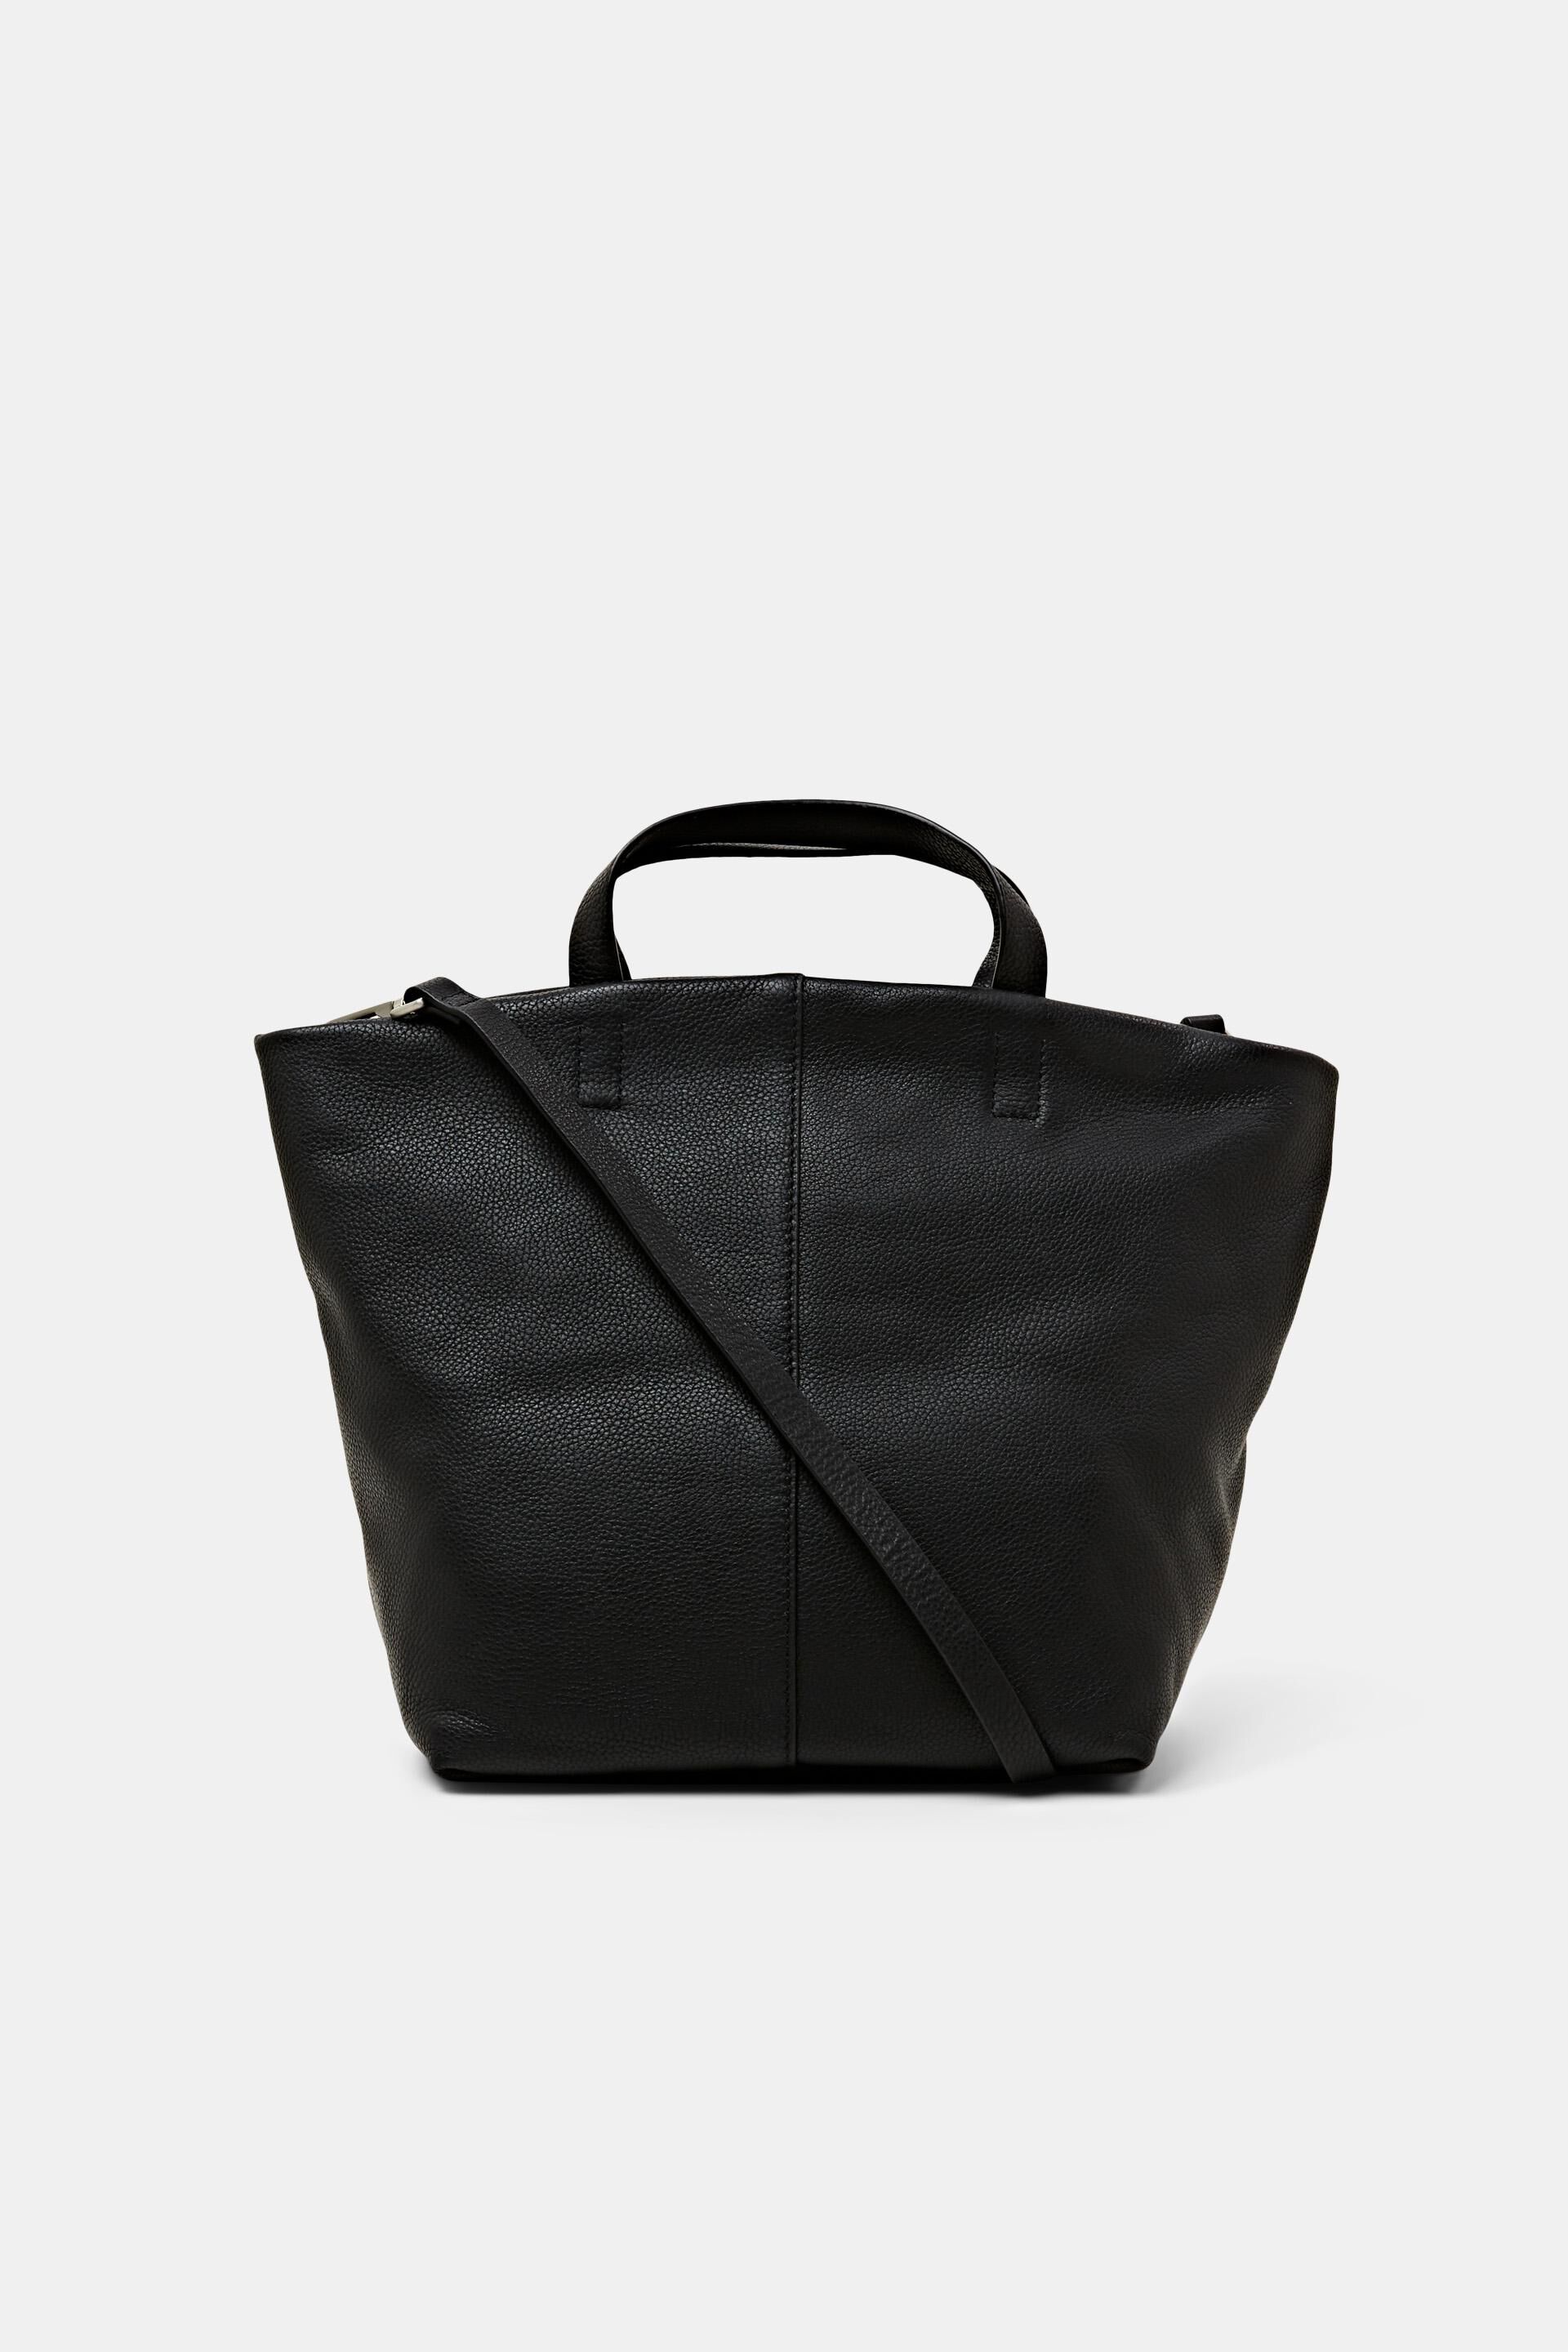 Esprit Online Store Bags leather